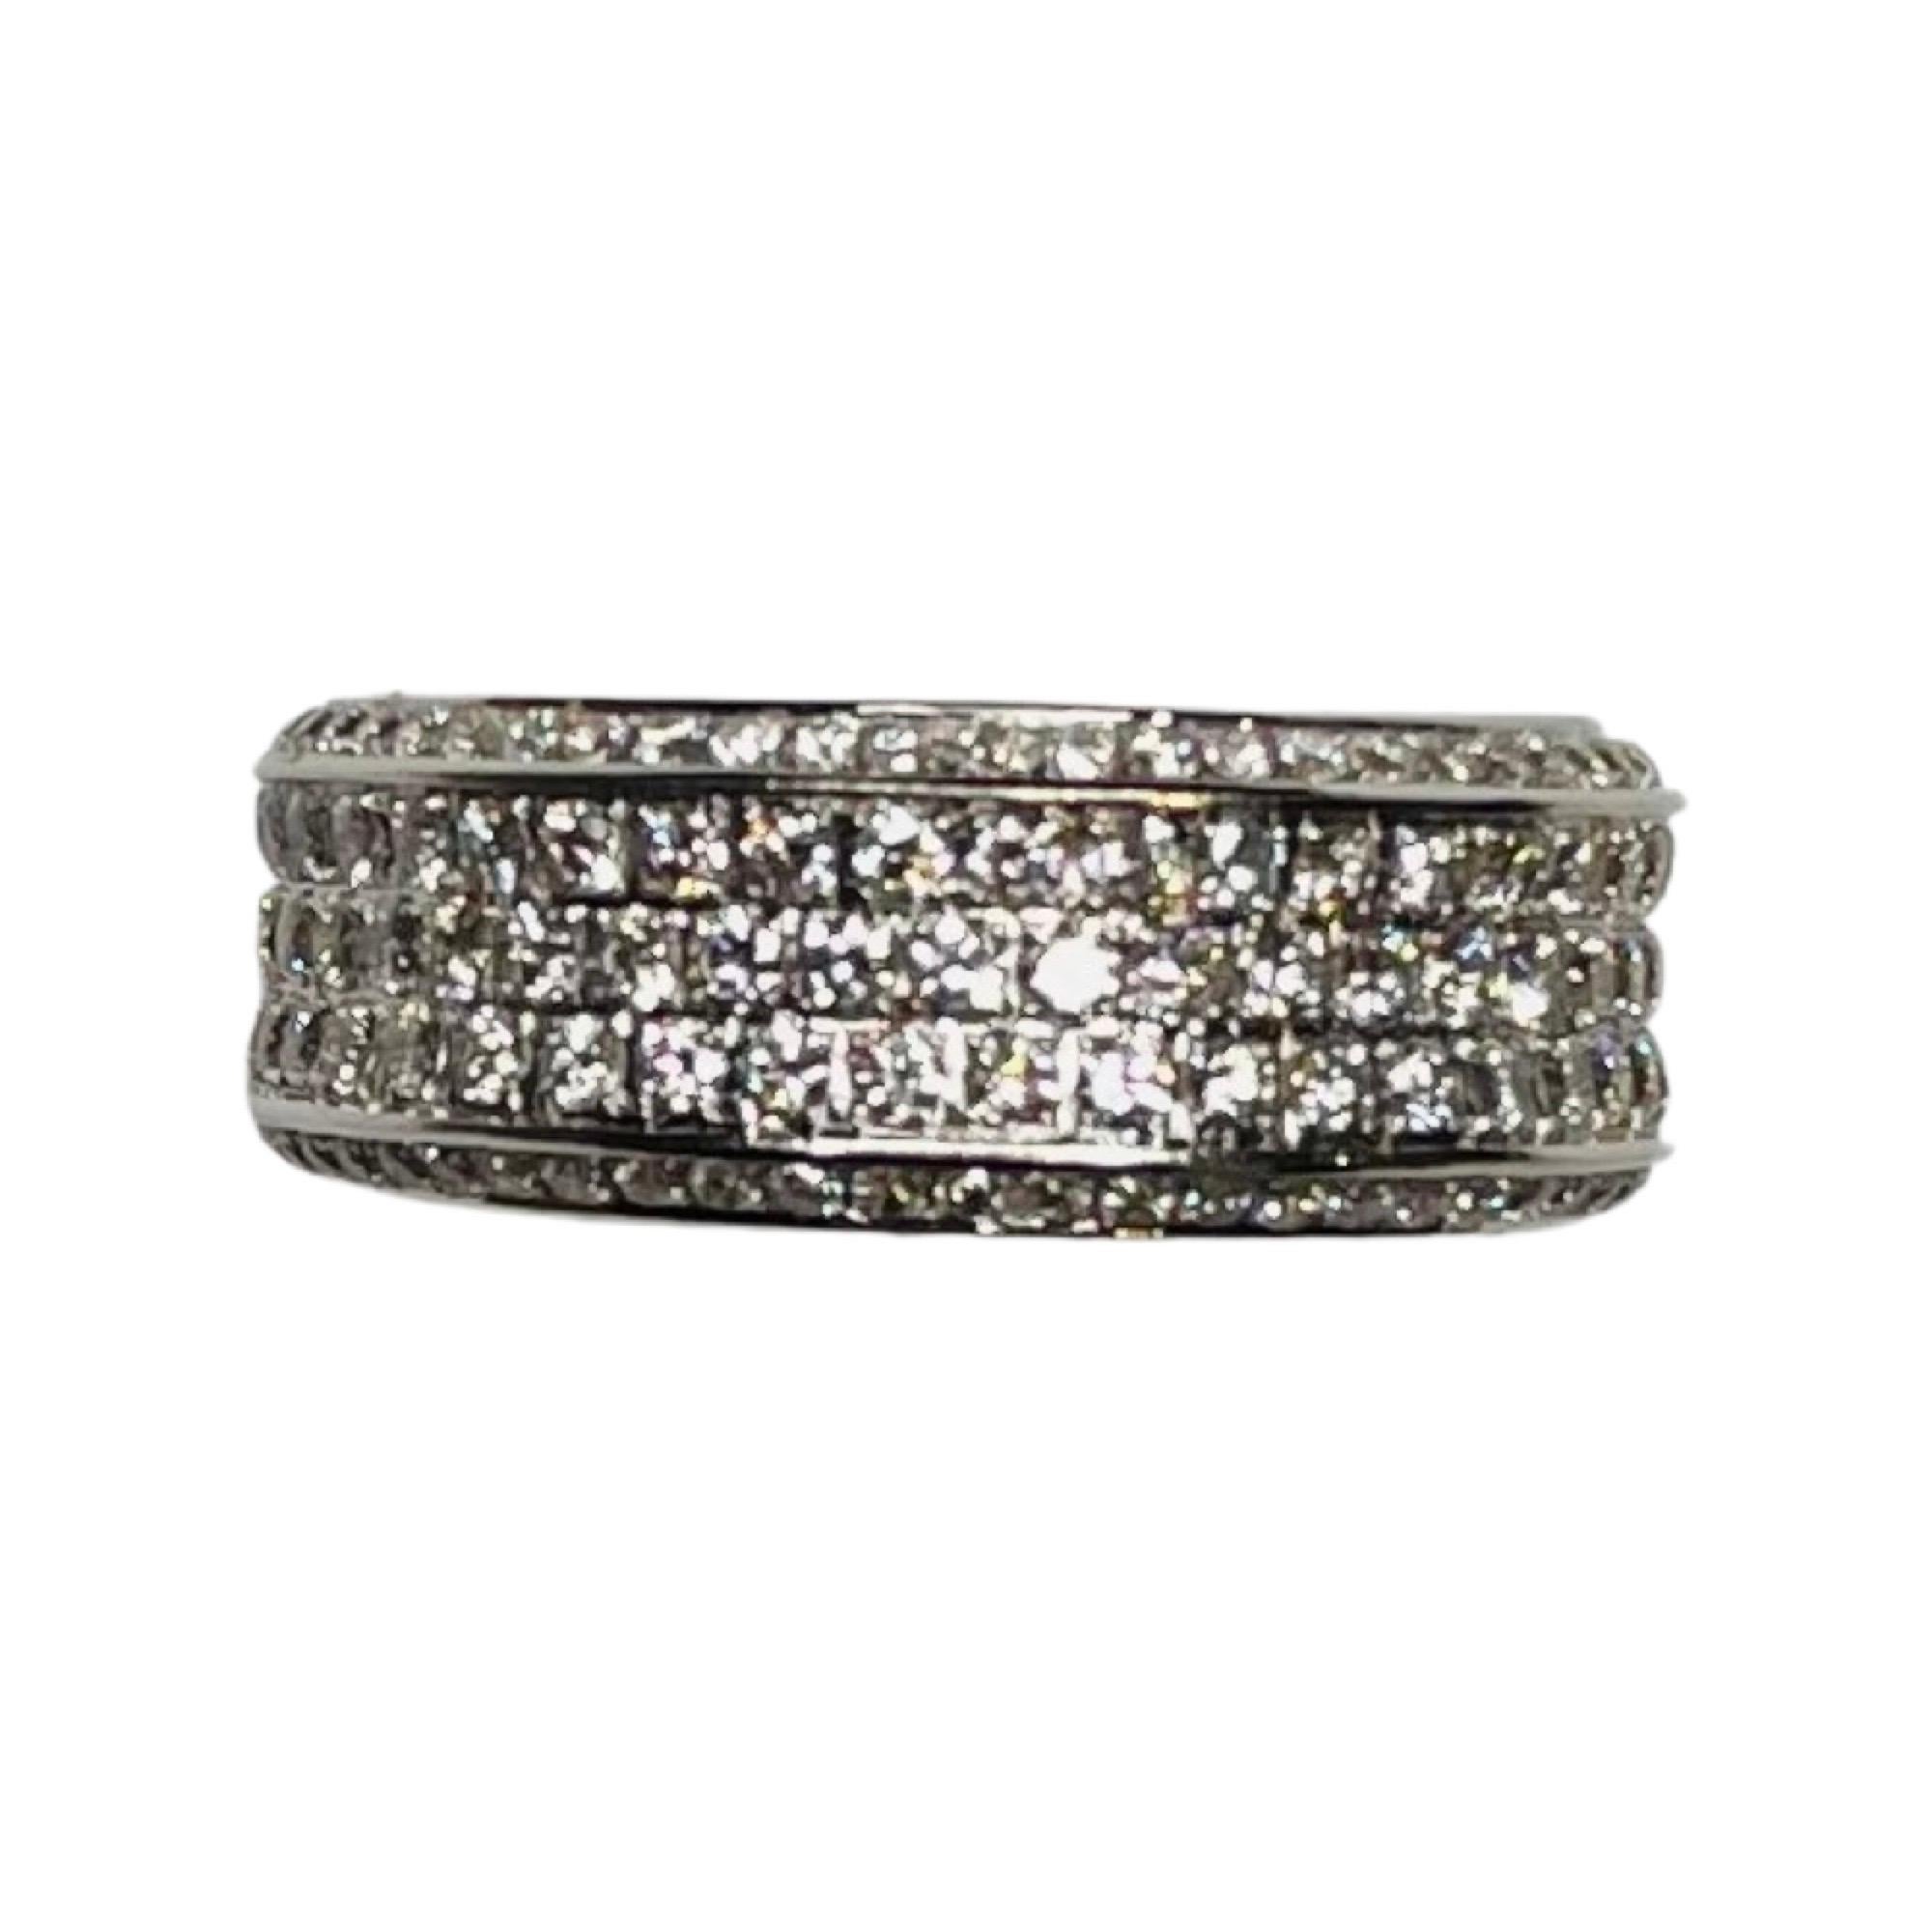 Alan Friedman 18K White Gold and Diamond Eternity Band. There are 231 full cut round brilliant diamonds of VS clarity and G color. There is a total diamond weight of 2.71 carats. These diamonds are pave set in 5 rows, three in the center and the